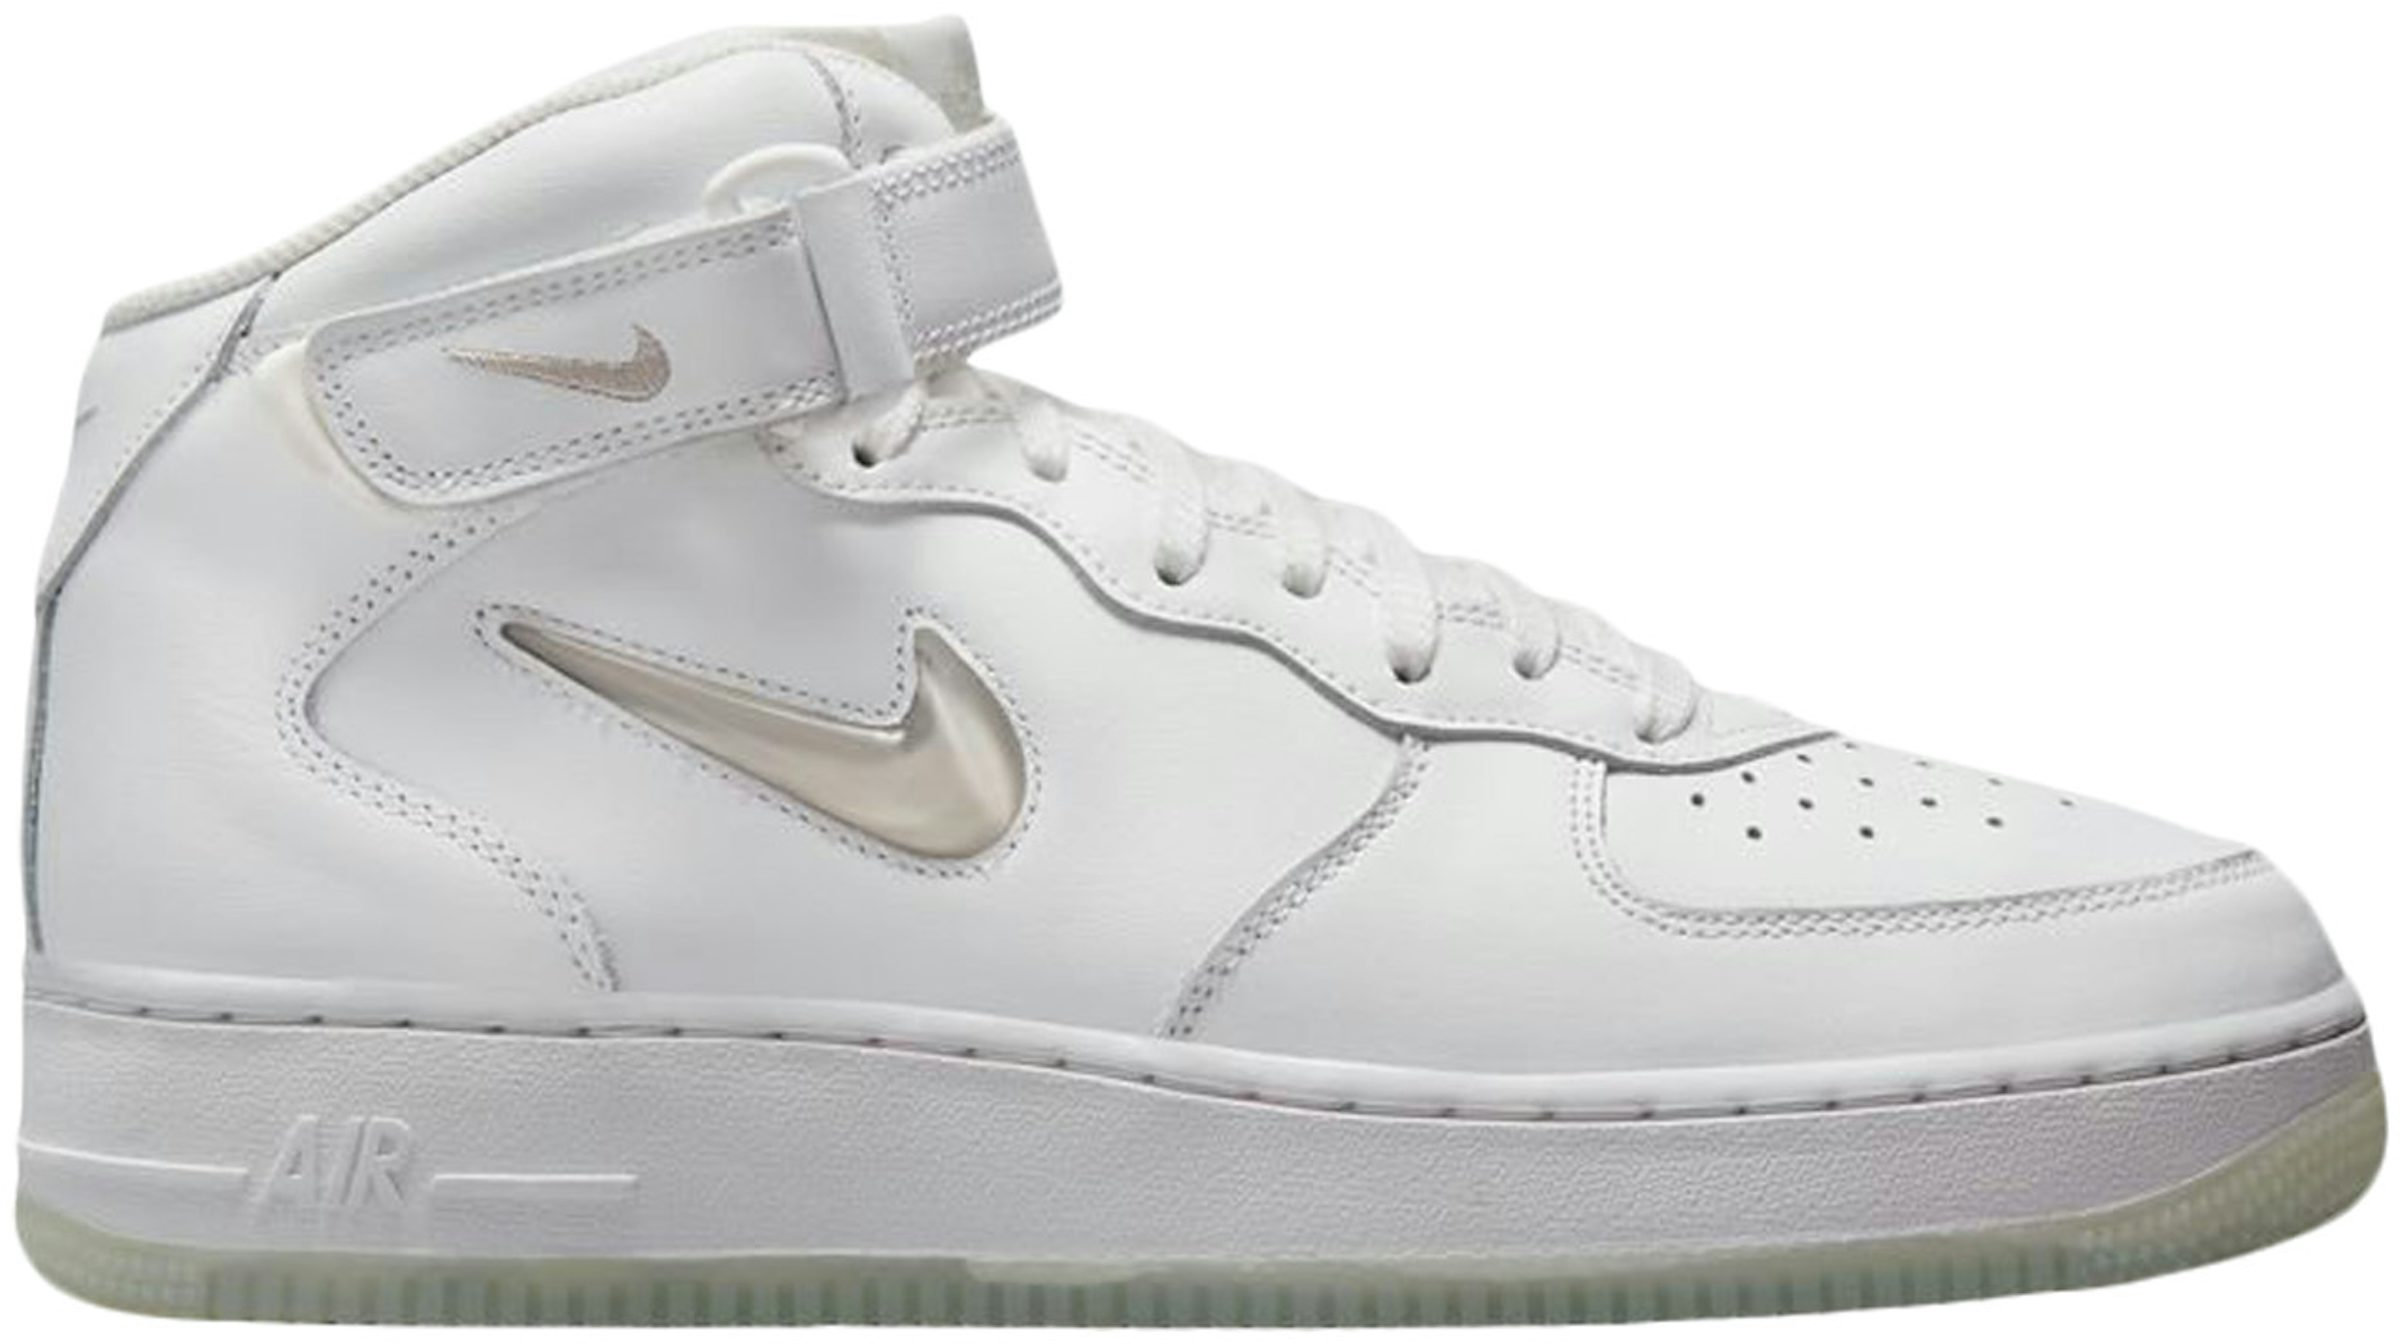 Nike Air Force 1 Mid '07 Color of the Month Summit White Men's - DZ2672-101  - US